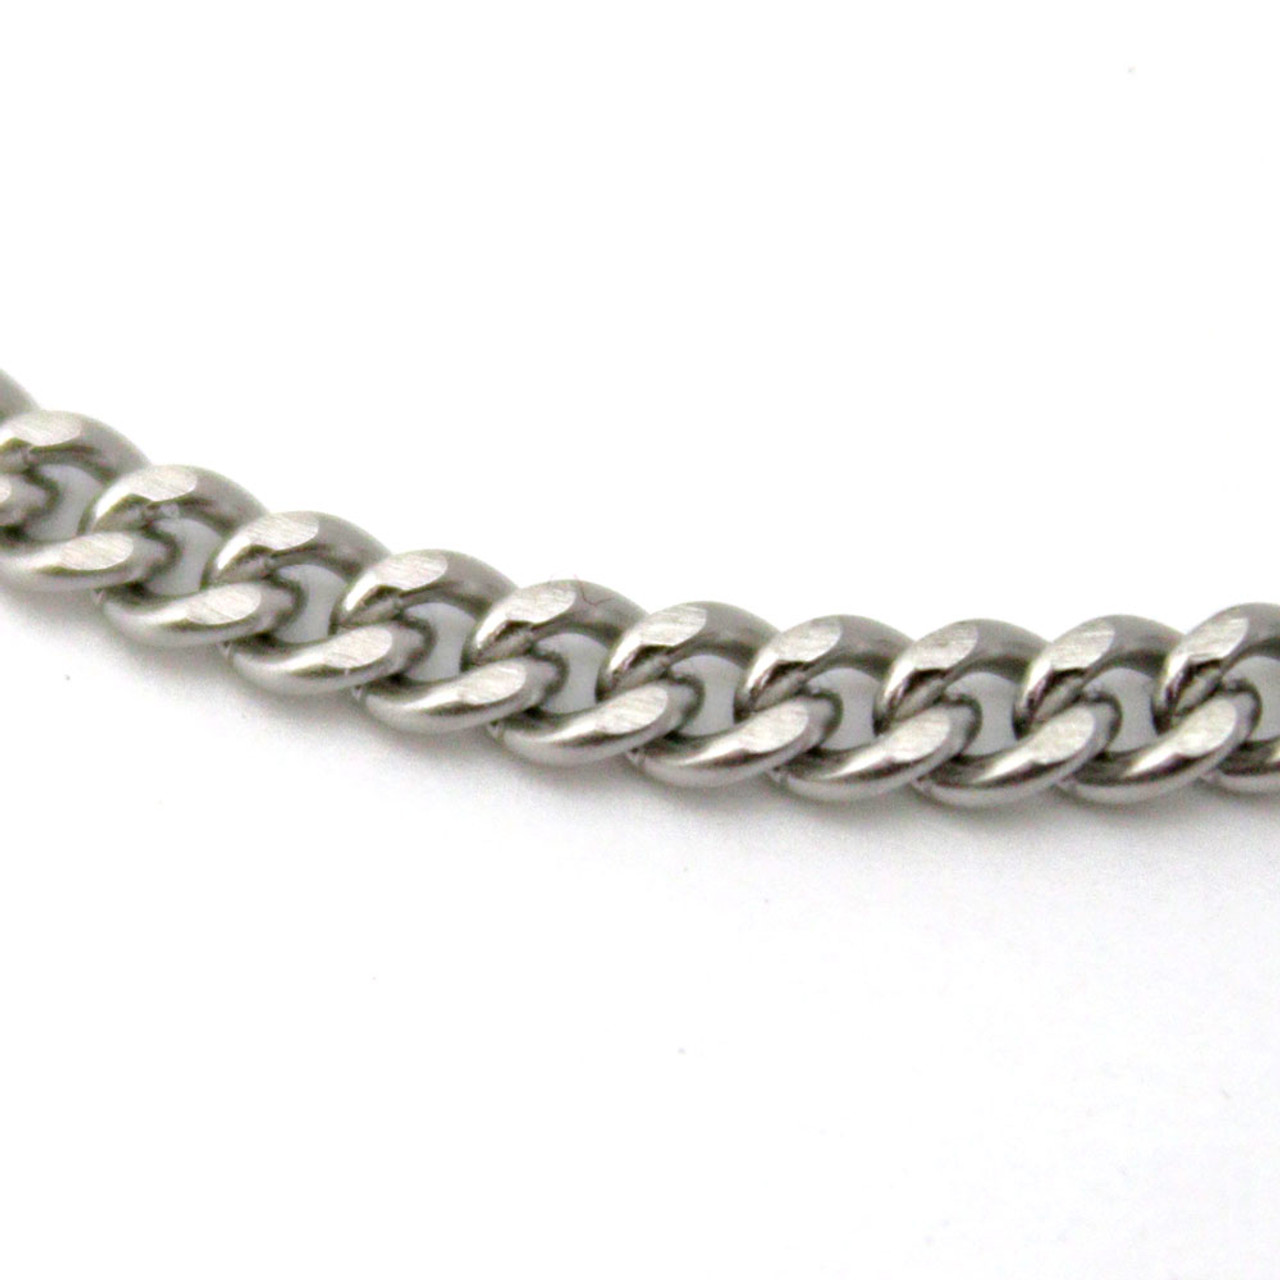 Stainless Steel Curb Chain Necklace